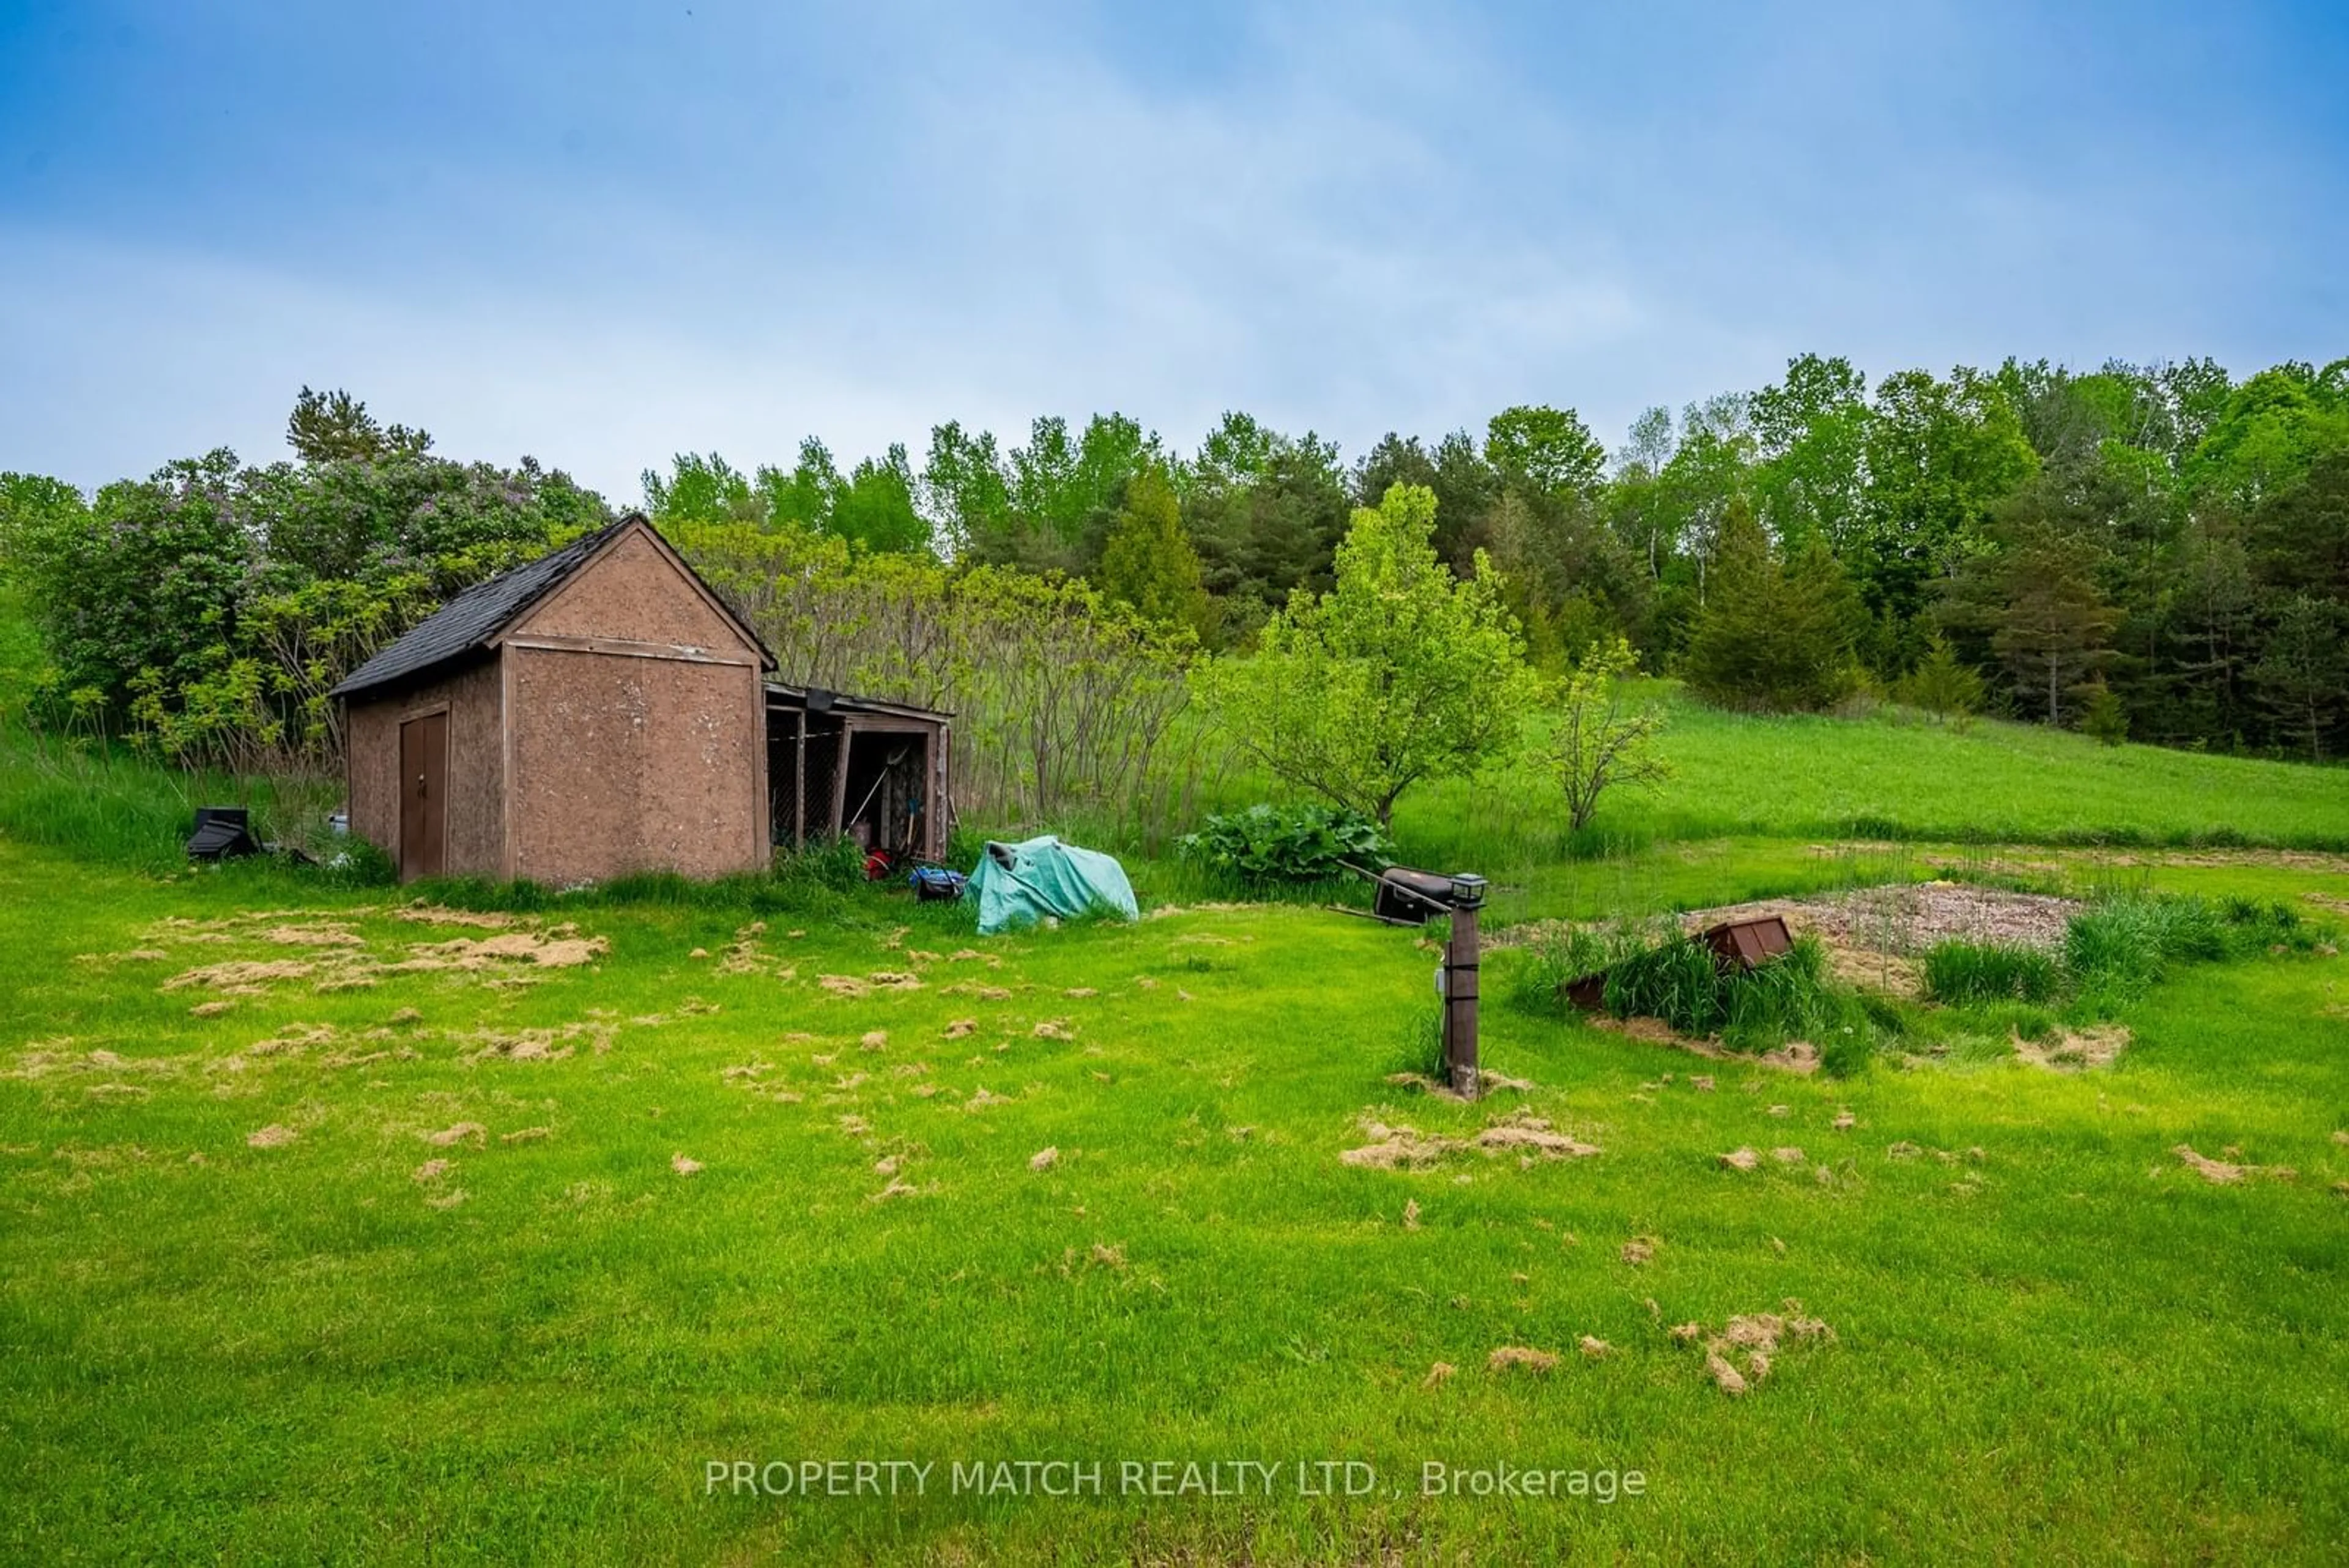 Shed for 367 Stephens Mill Rd, Clarington Ontario L1C 4V7